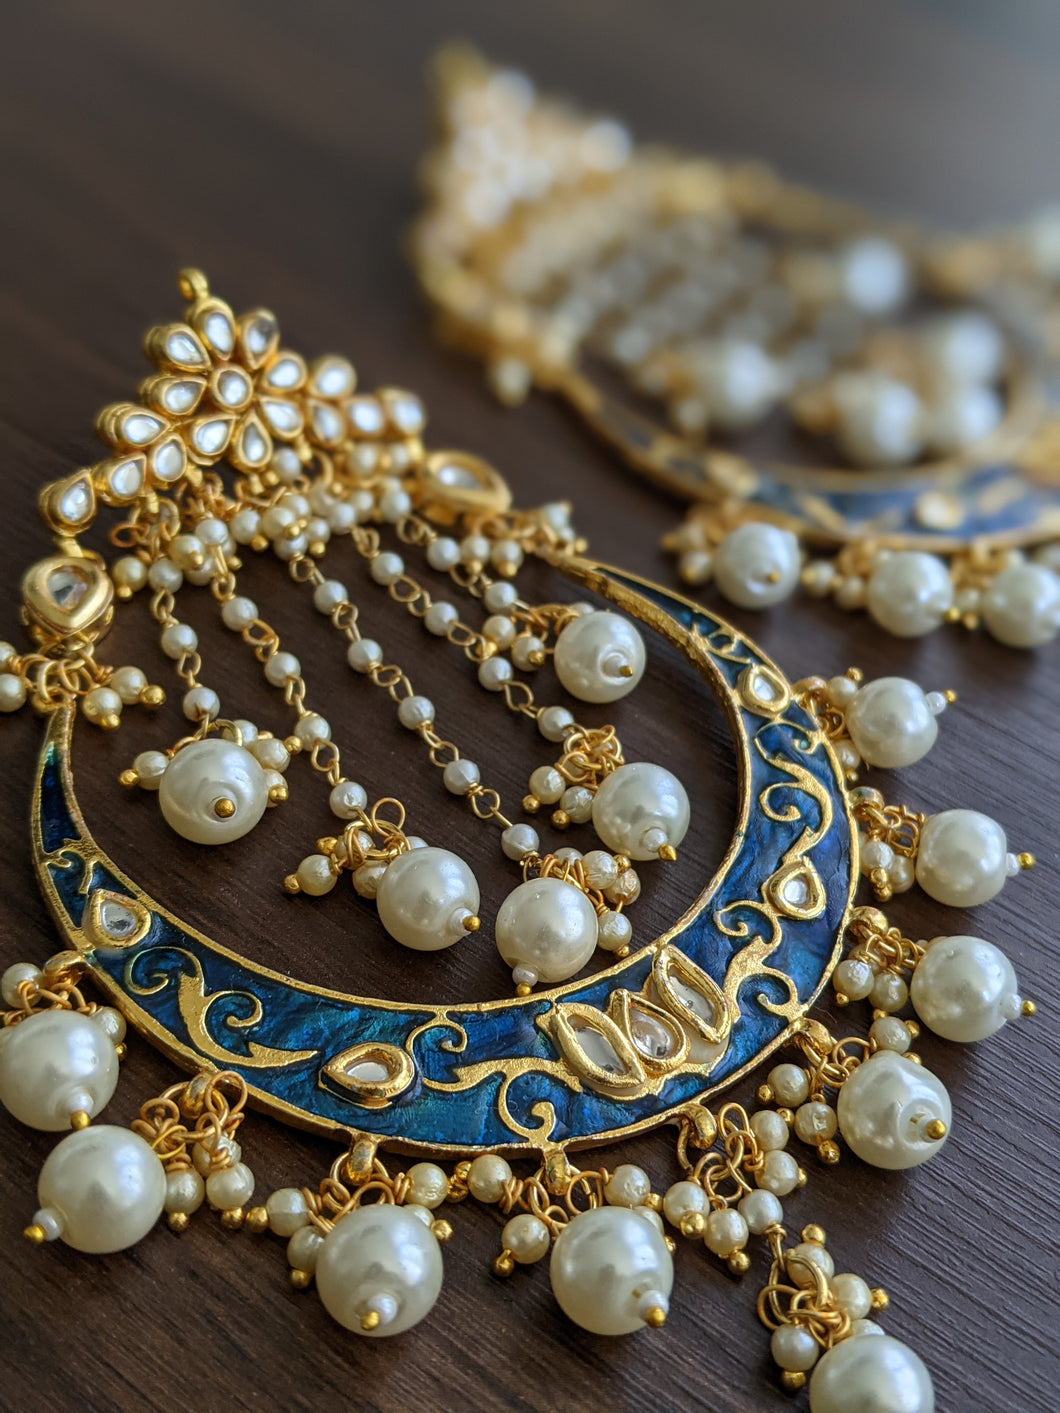 These earrings are a perfect example of royalty & exquisite craftsmanship. These royal blue earrings have a crescent moon shaped design which is hand painted & crafted by skilled artisans.